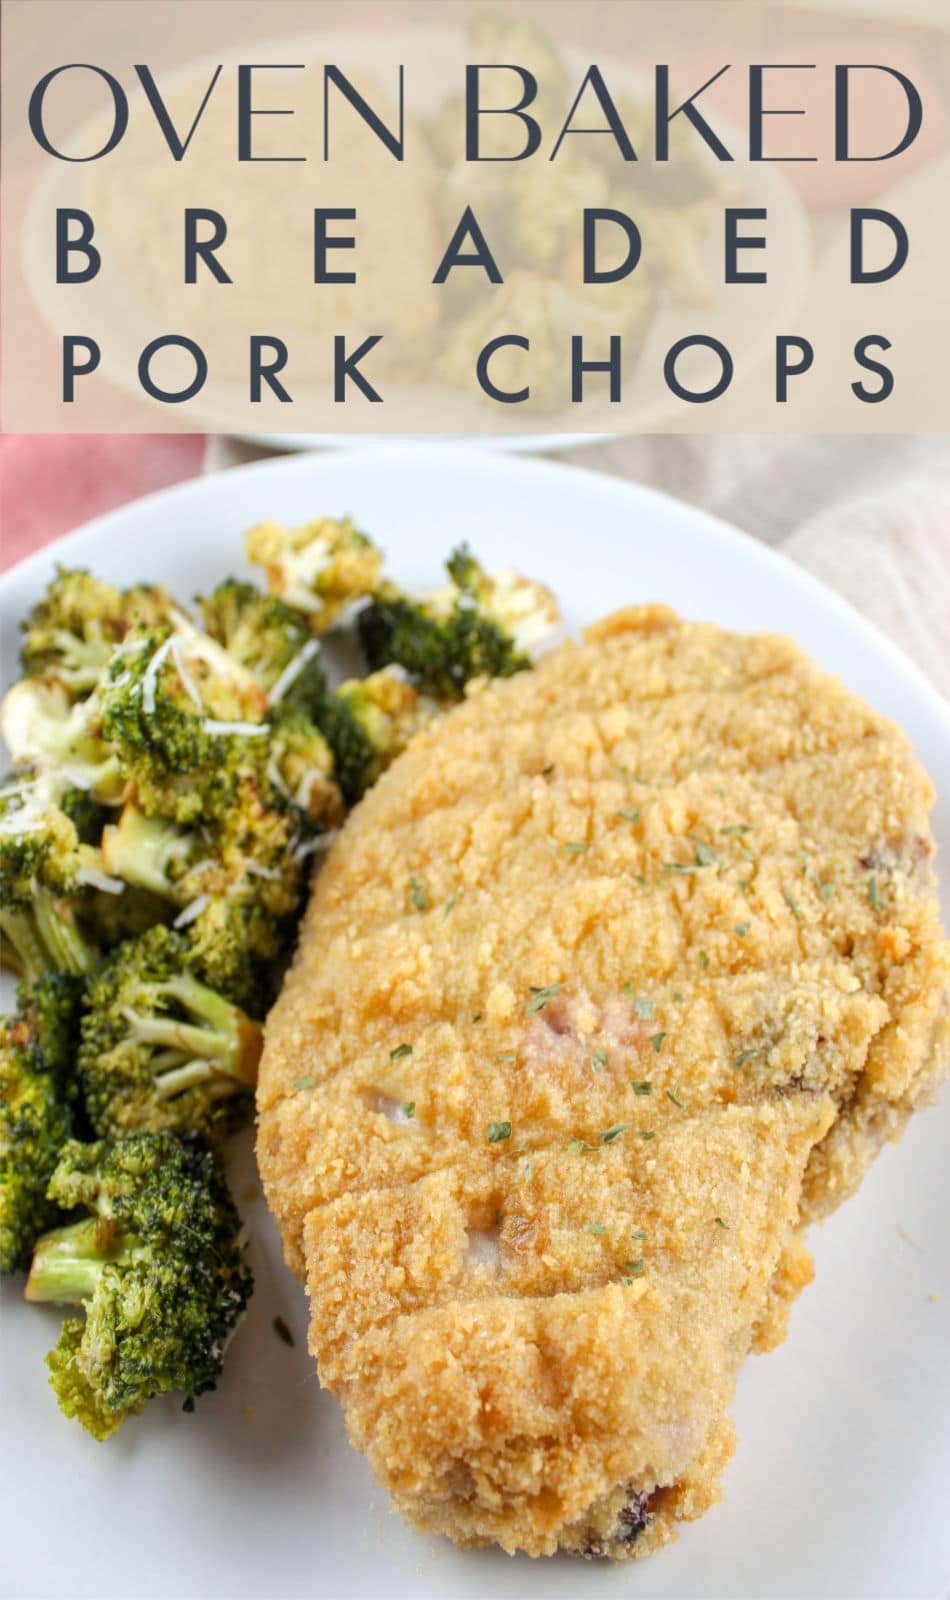 Breaded Oven Baked Pork Chops are so easy to make and they come out juicy and delicious every time! These are simple and no mess – I also have a secret tip for making them extra juicy!
 via @foodhussy